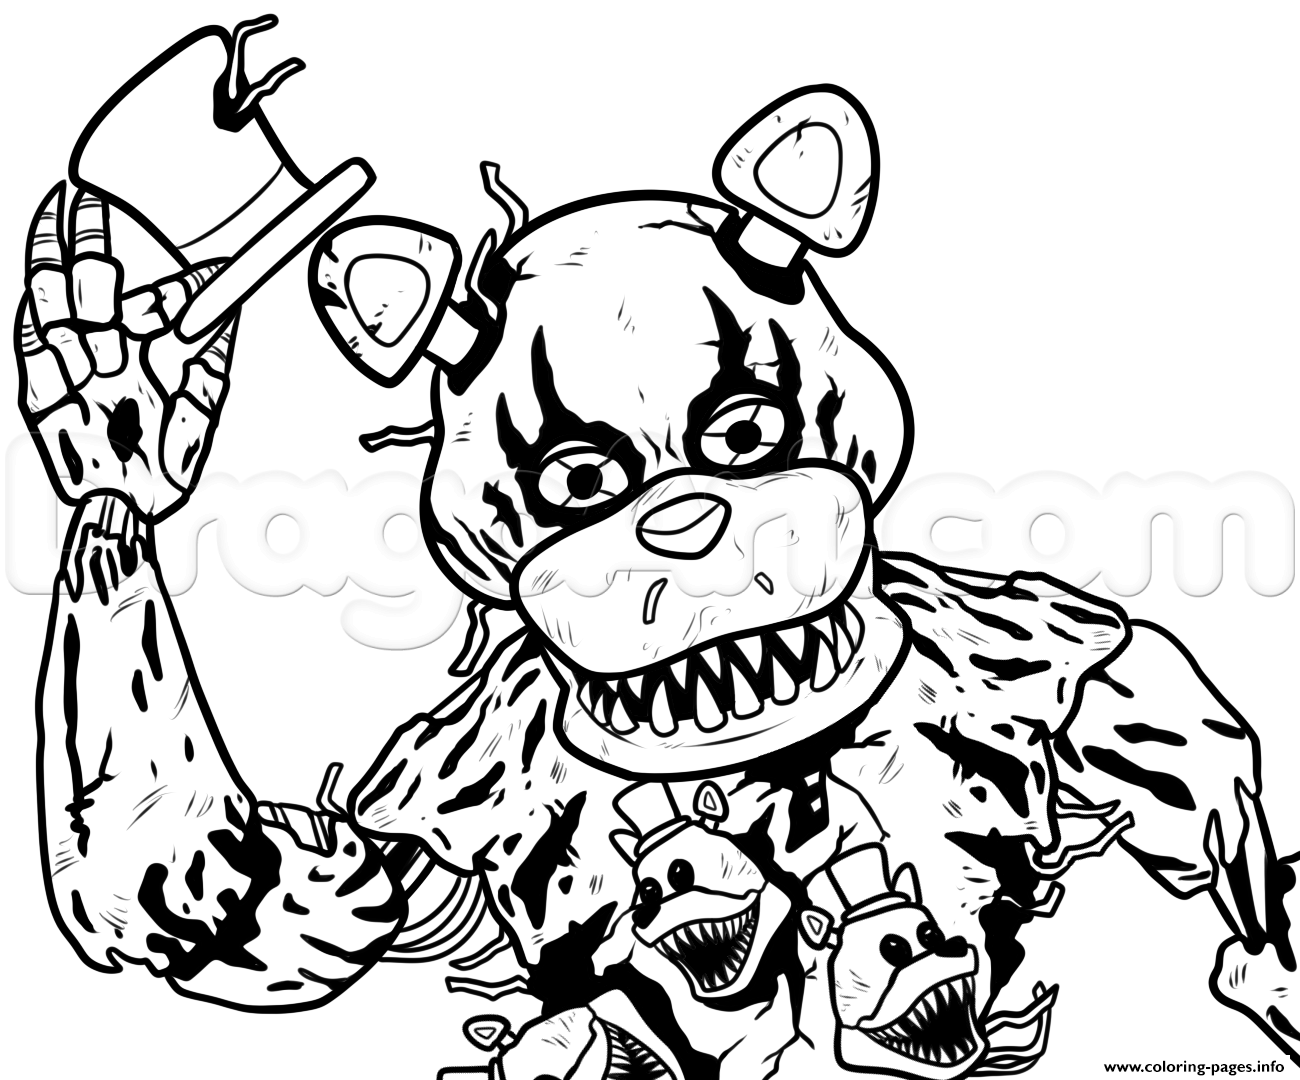 Nights Freddys Fnaf Coloring Pages Free Printable Draw Nightmare Freddy